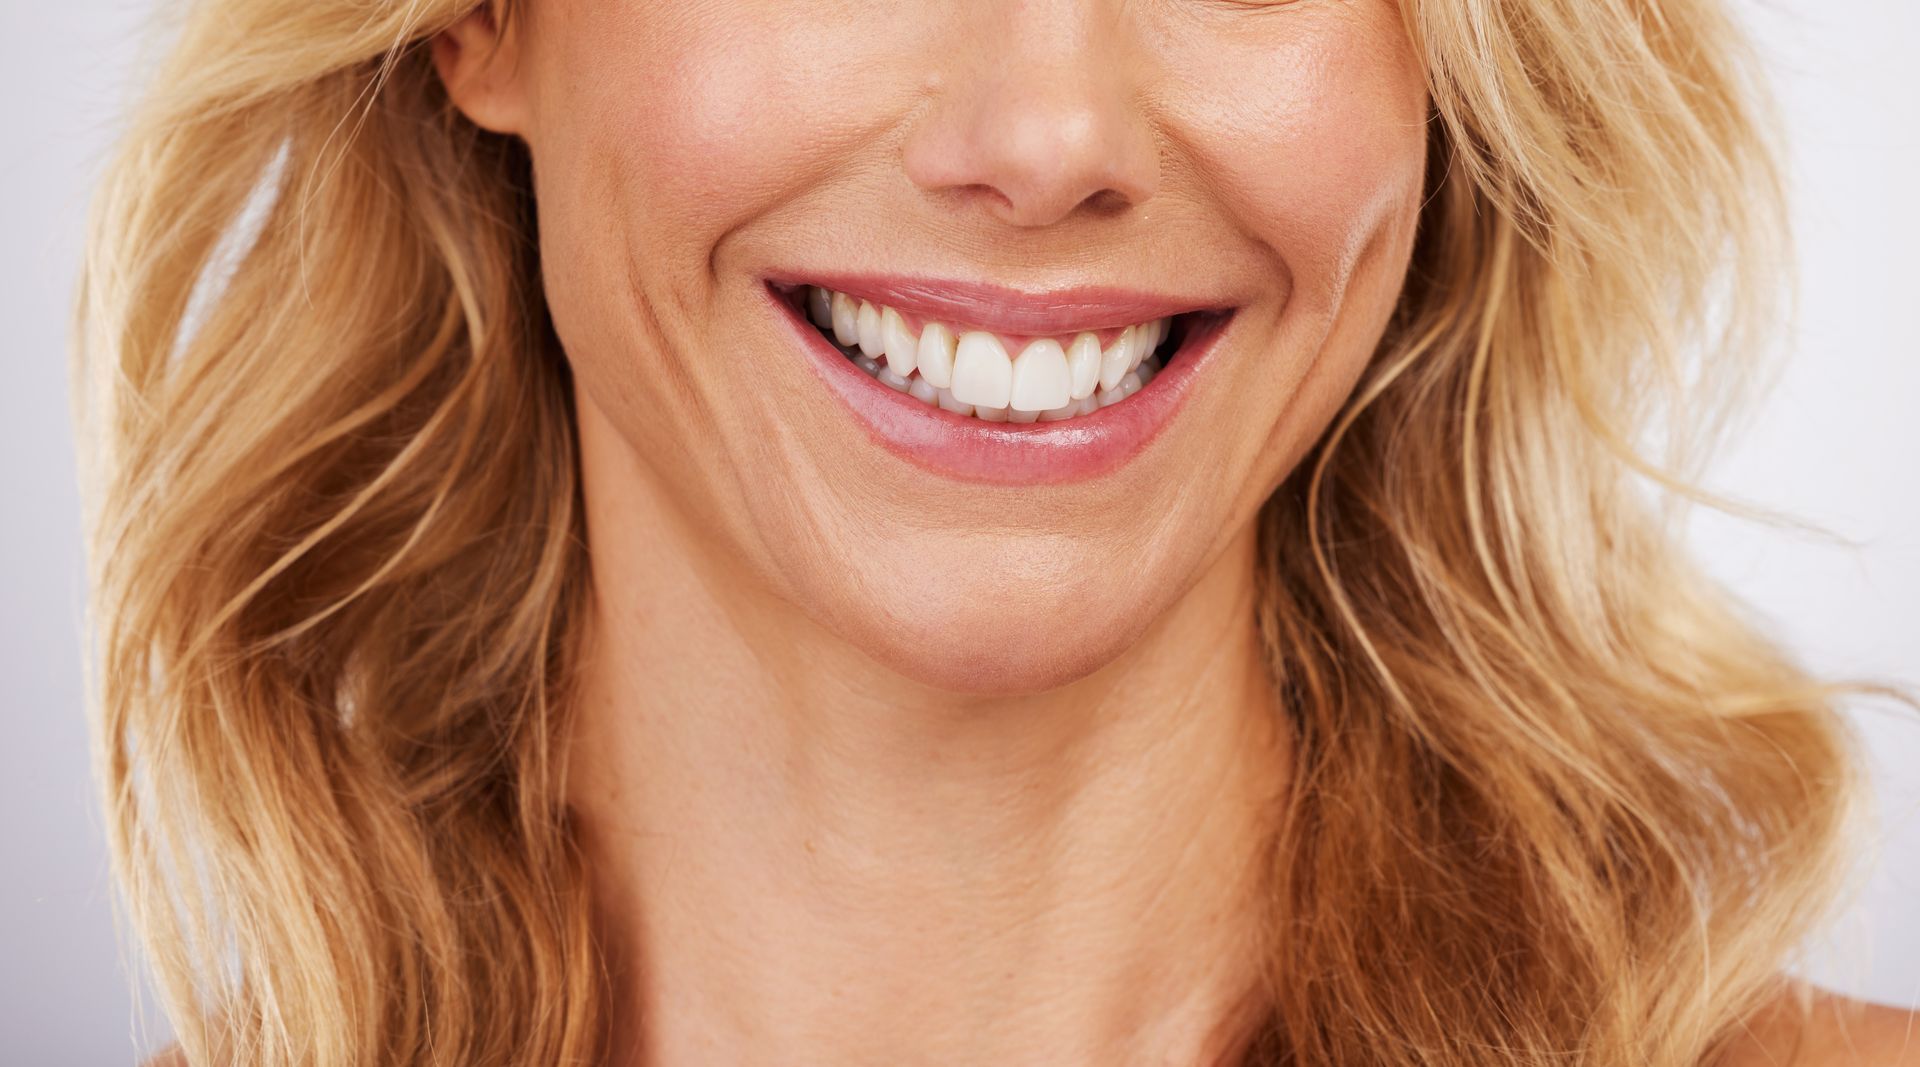 Close-up smile of woman smiling with dental crowns